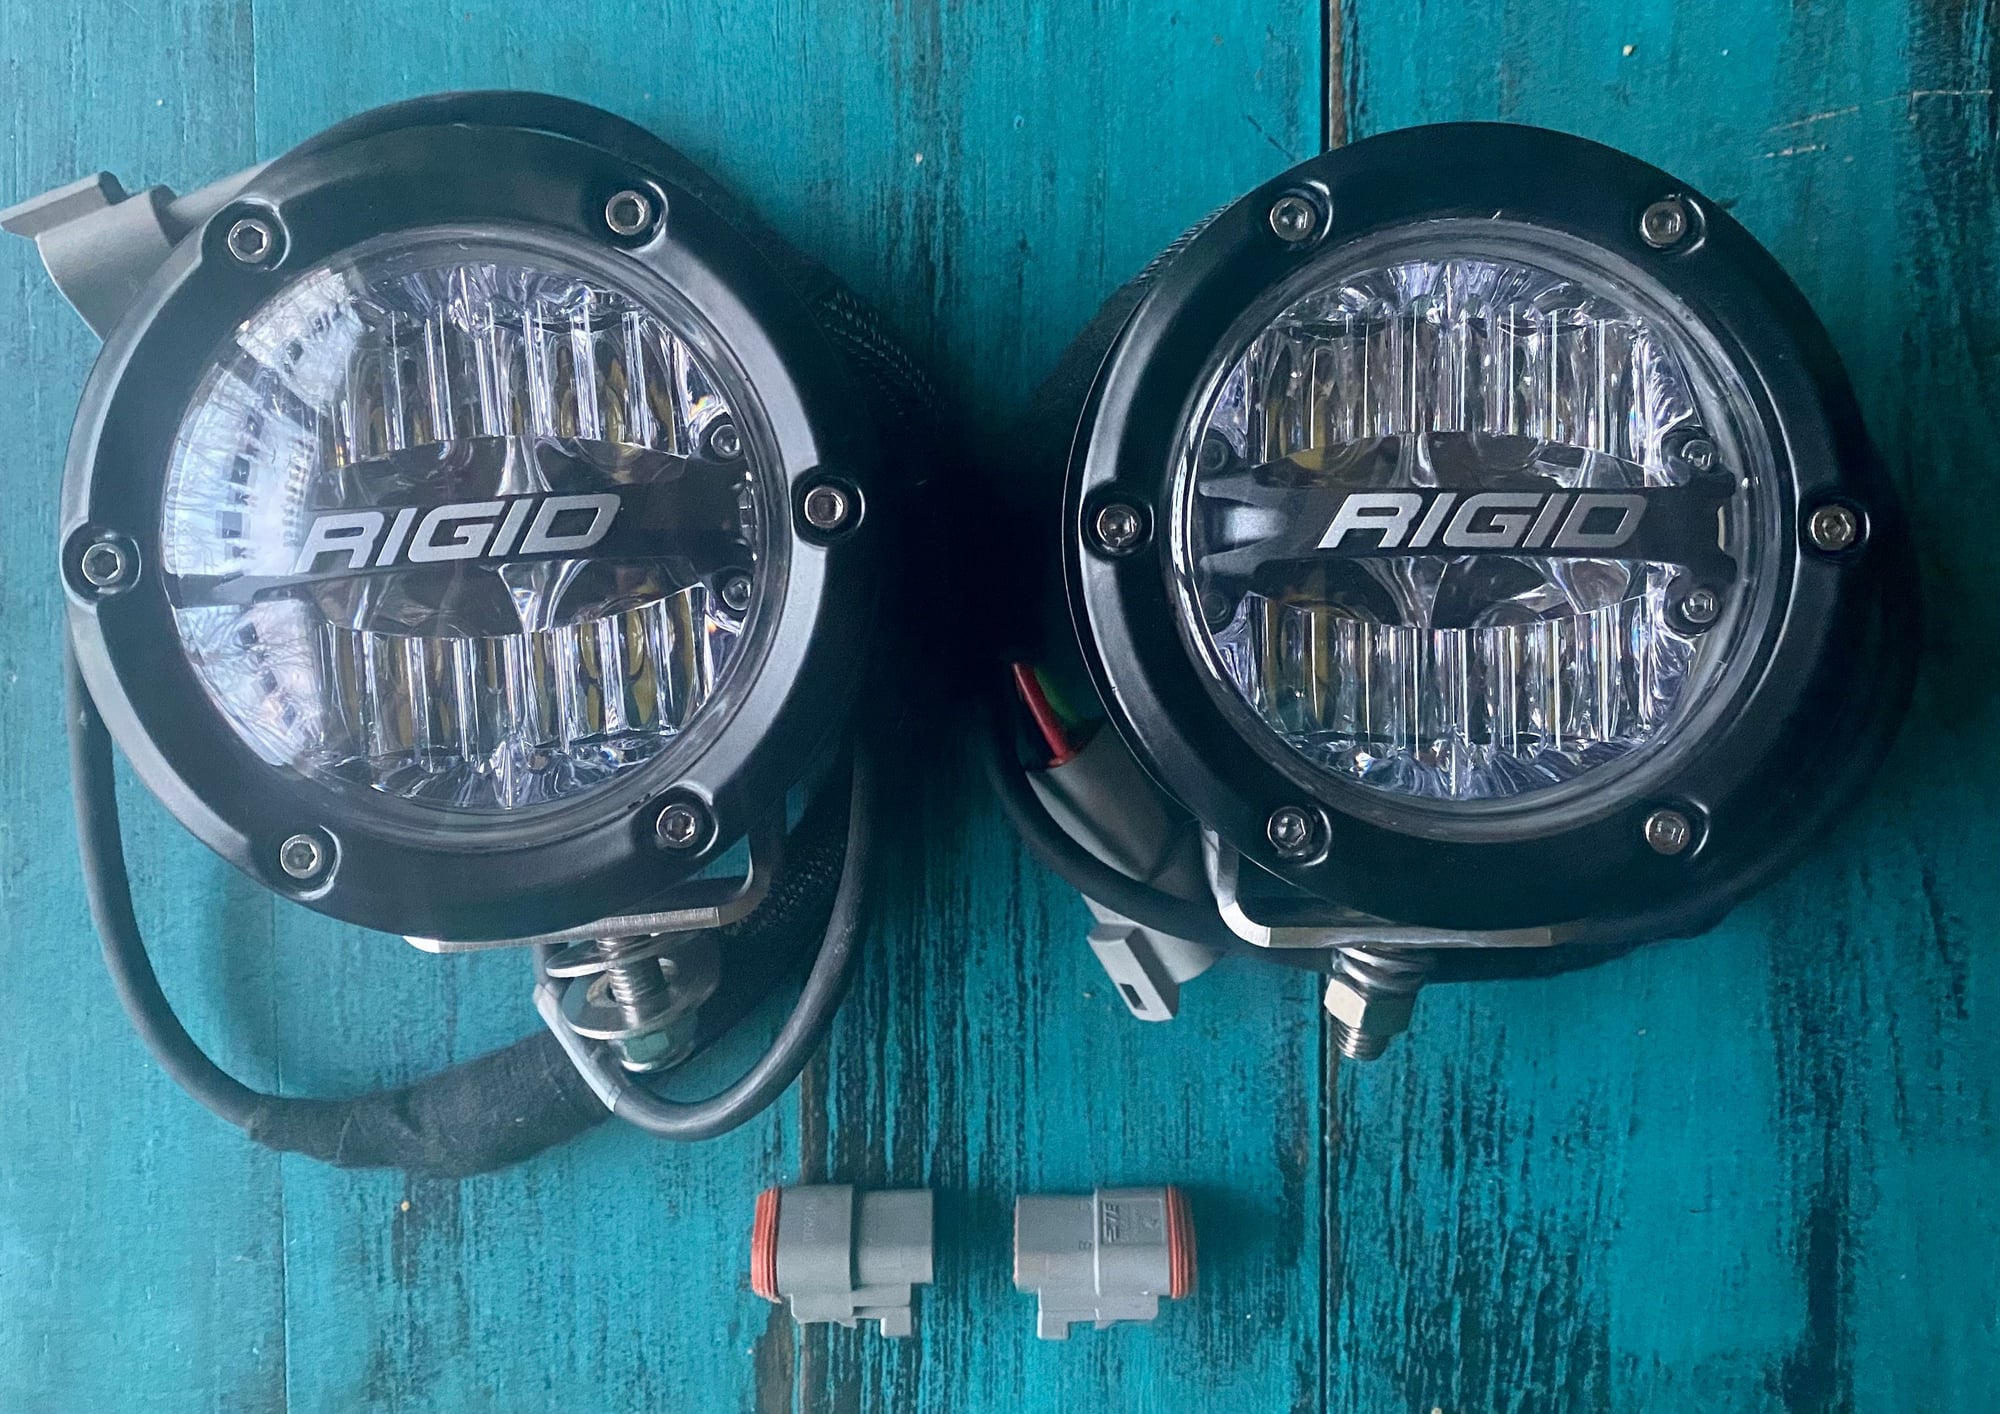 Accessories - Rigid 360 4” LED pods.  Driving pattern - Used - All Years Any Make All Models - Saltillo, MS 38866, United States